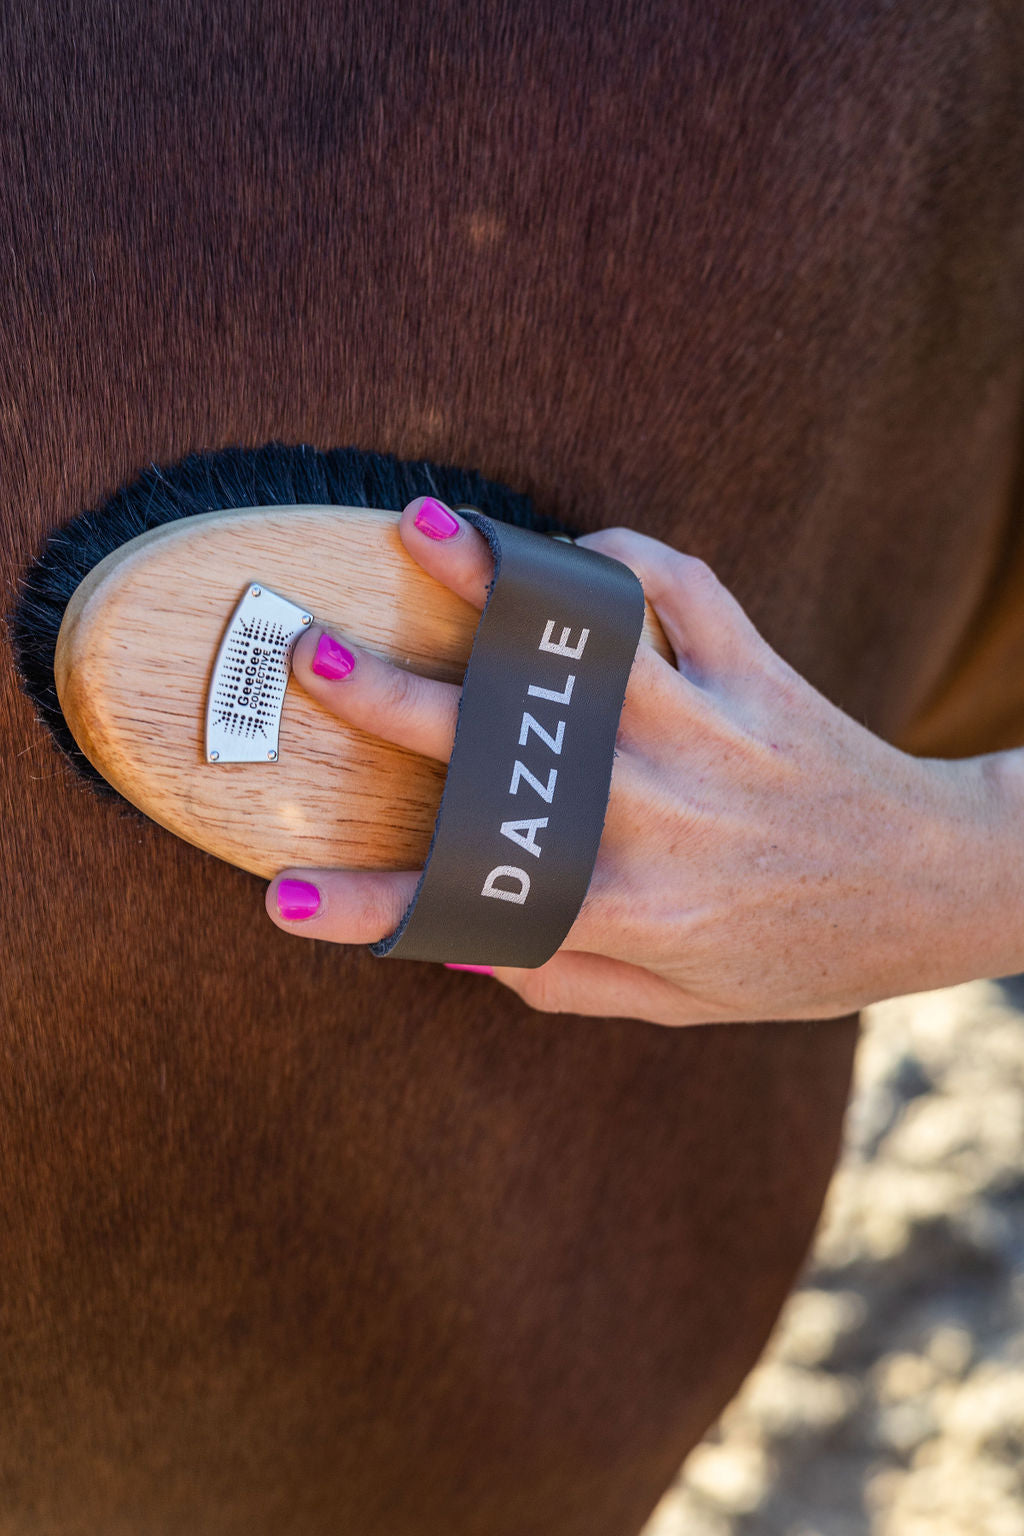 GeeGee COLLECTIVE | 'Dazzle' Wool Body Brush-Ippico Equestrian-The Equestrian